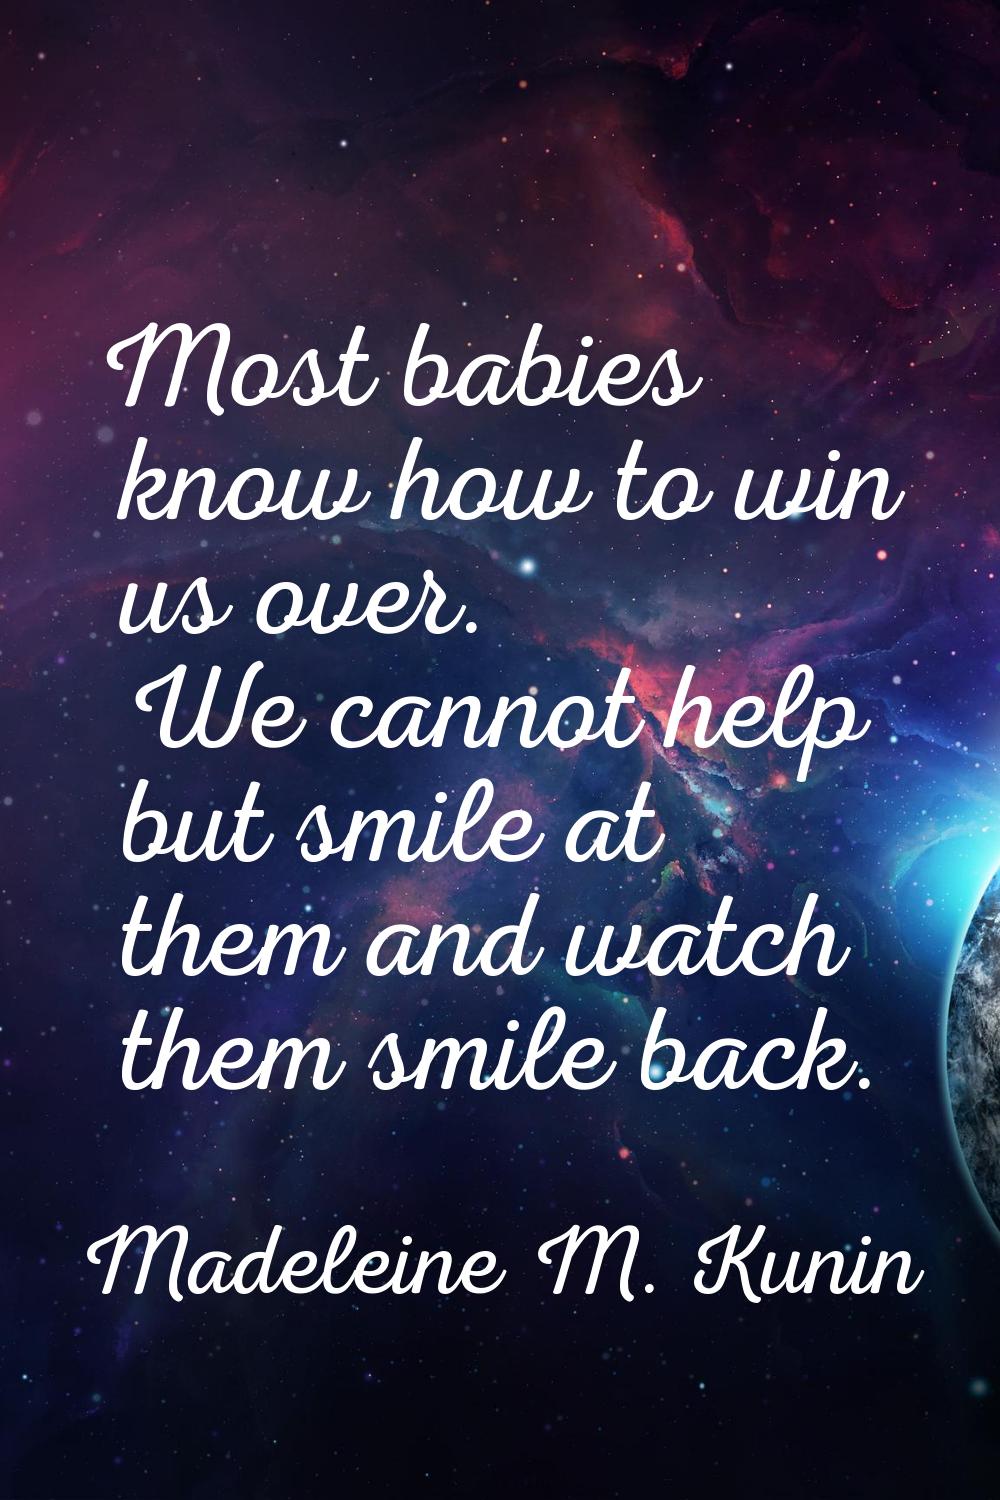 Most babies know how to win us over. We cannot help but smile at them and watch them smile back.